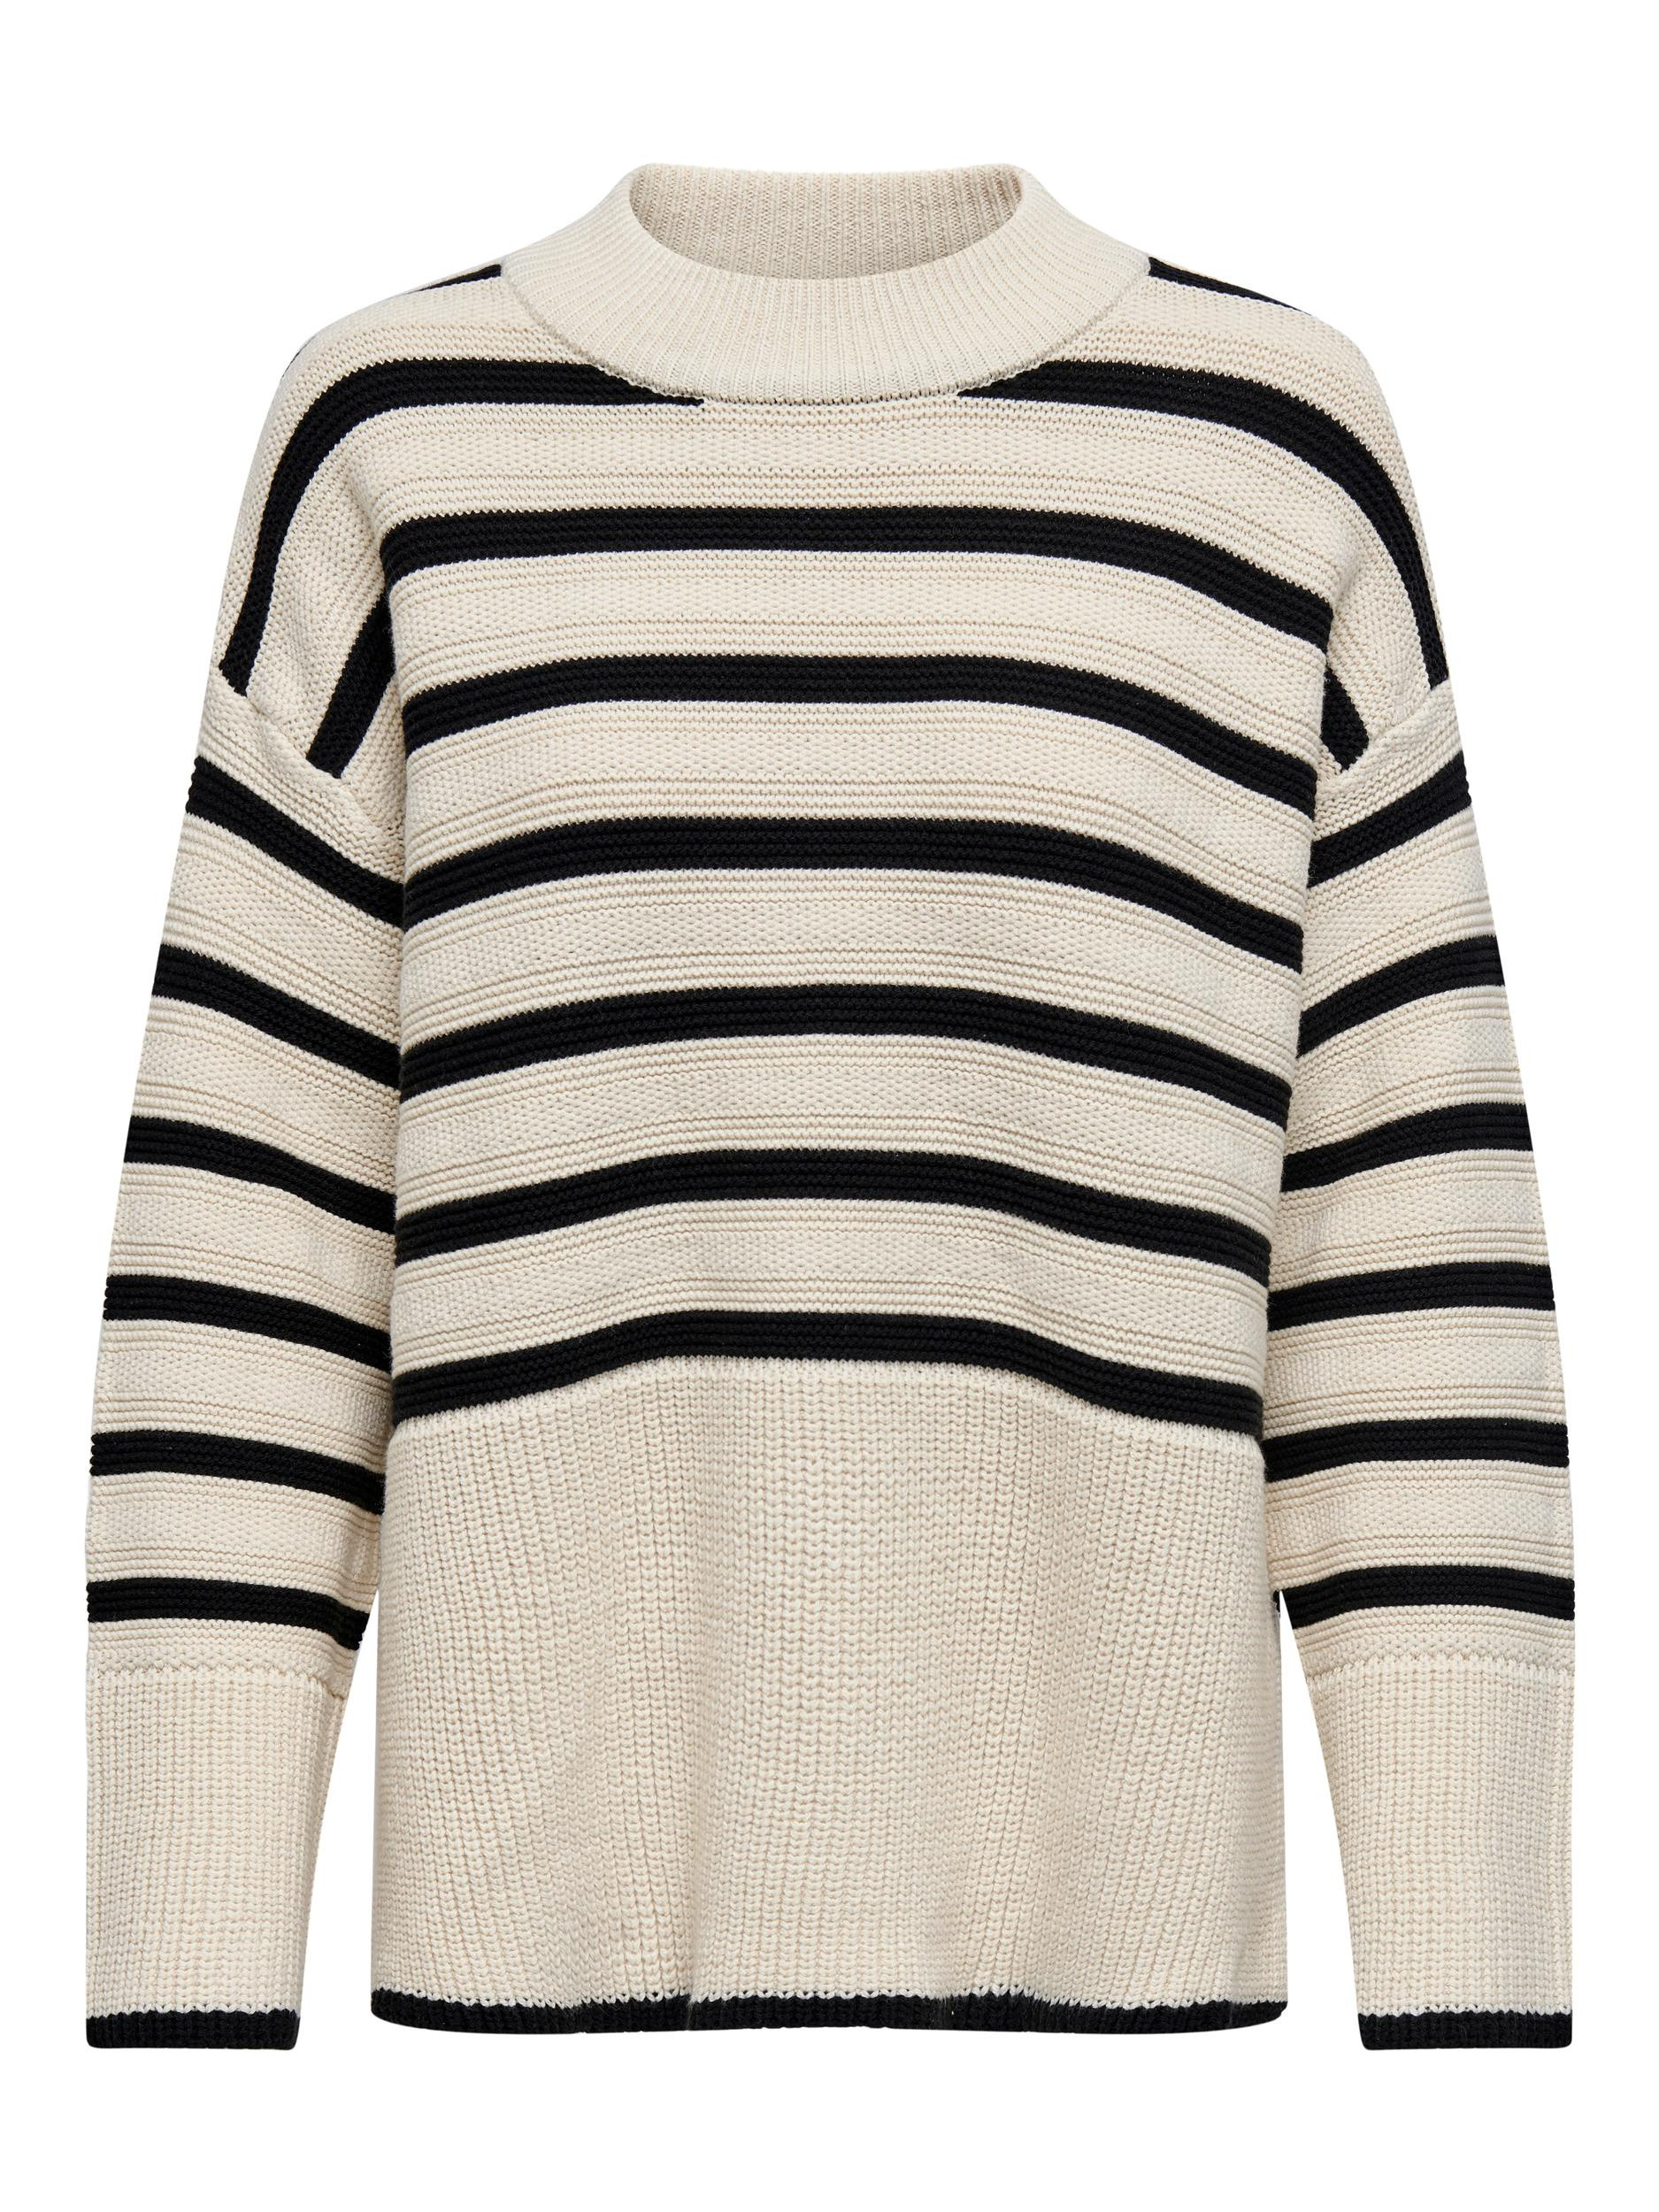 Only - Striped cotton blend sweater, Beige, large image number 0